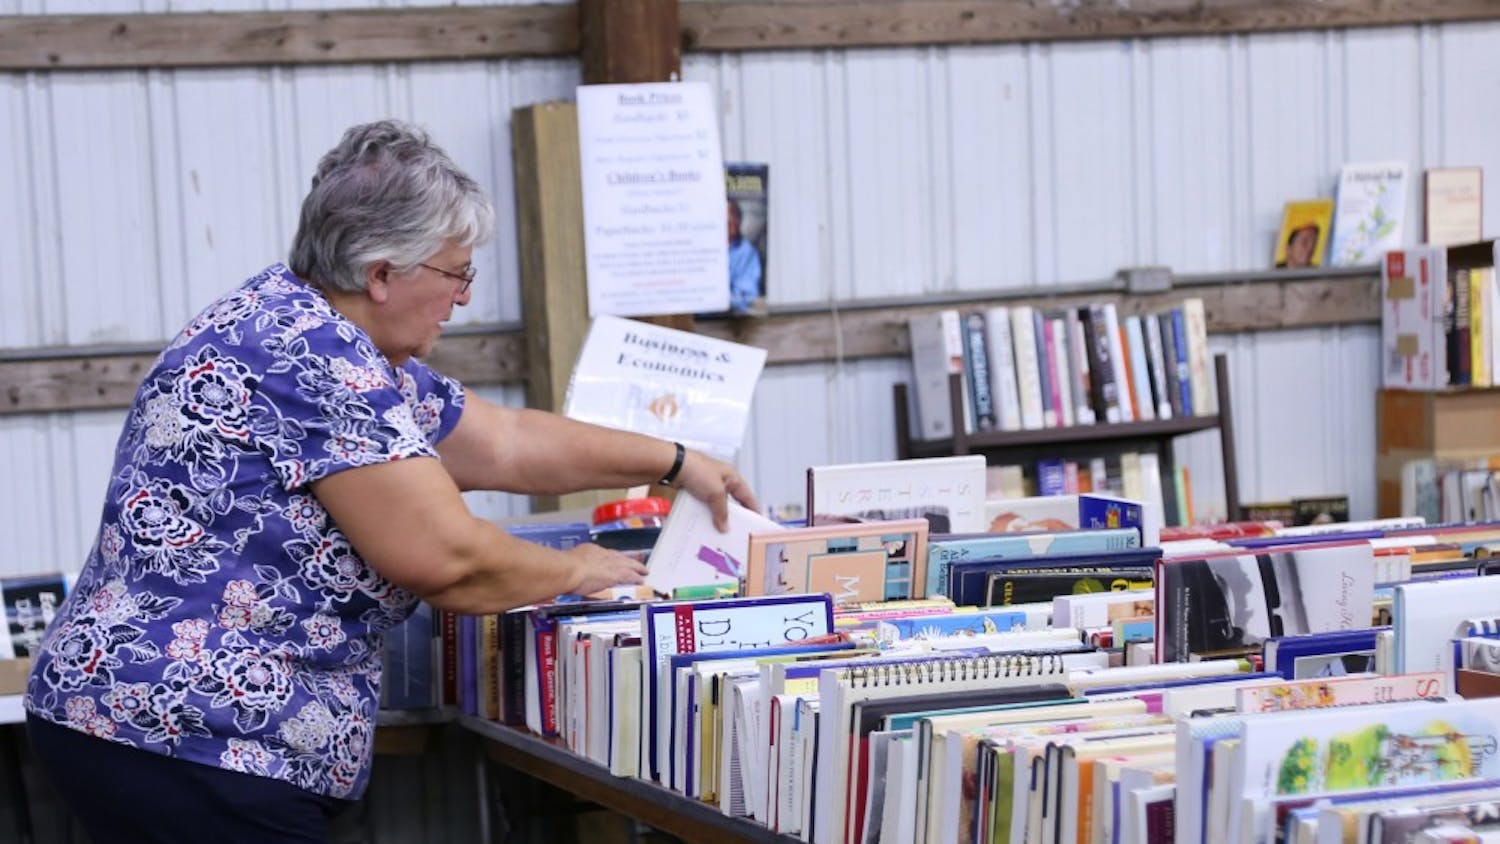 Rullen Fessenbecker searches for books at the Bloomington Community Book Fair, hosted by Hoosier Hills Food Bank. Fessenbecker, who lives in Nashville, Indiana, has visited the book fair more than 10 times.